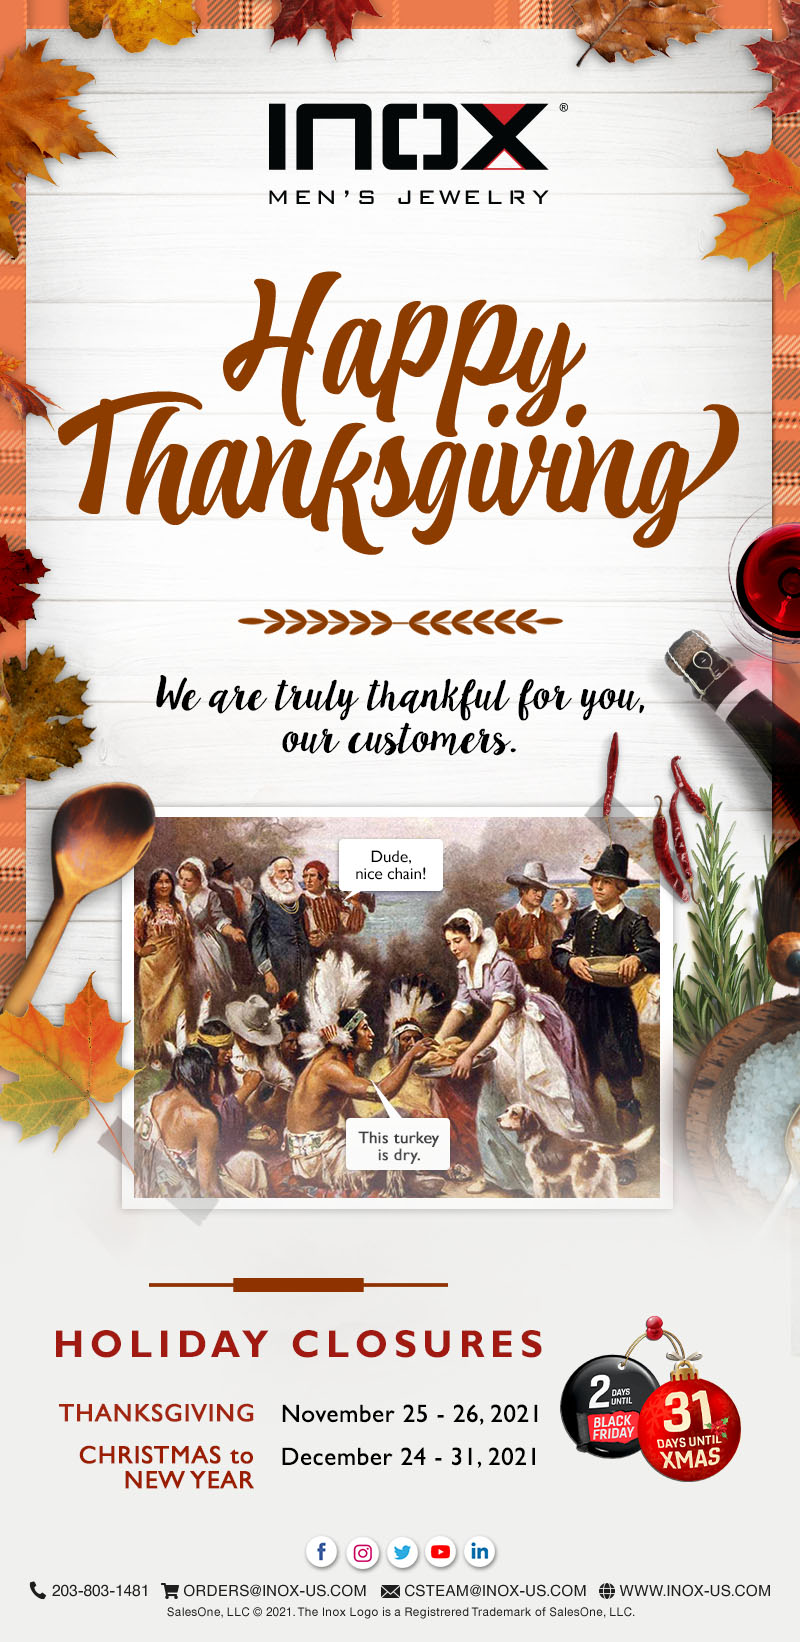 Happy Thanksgiving from INOX